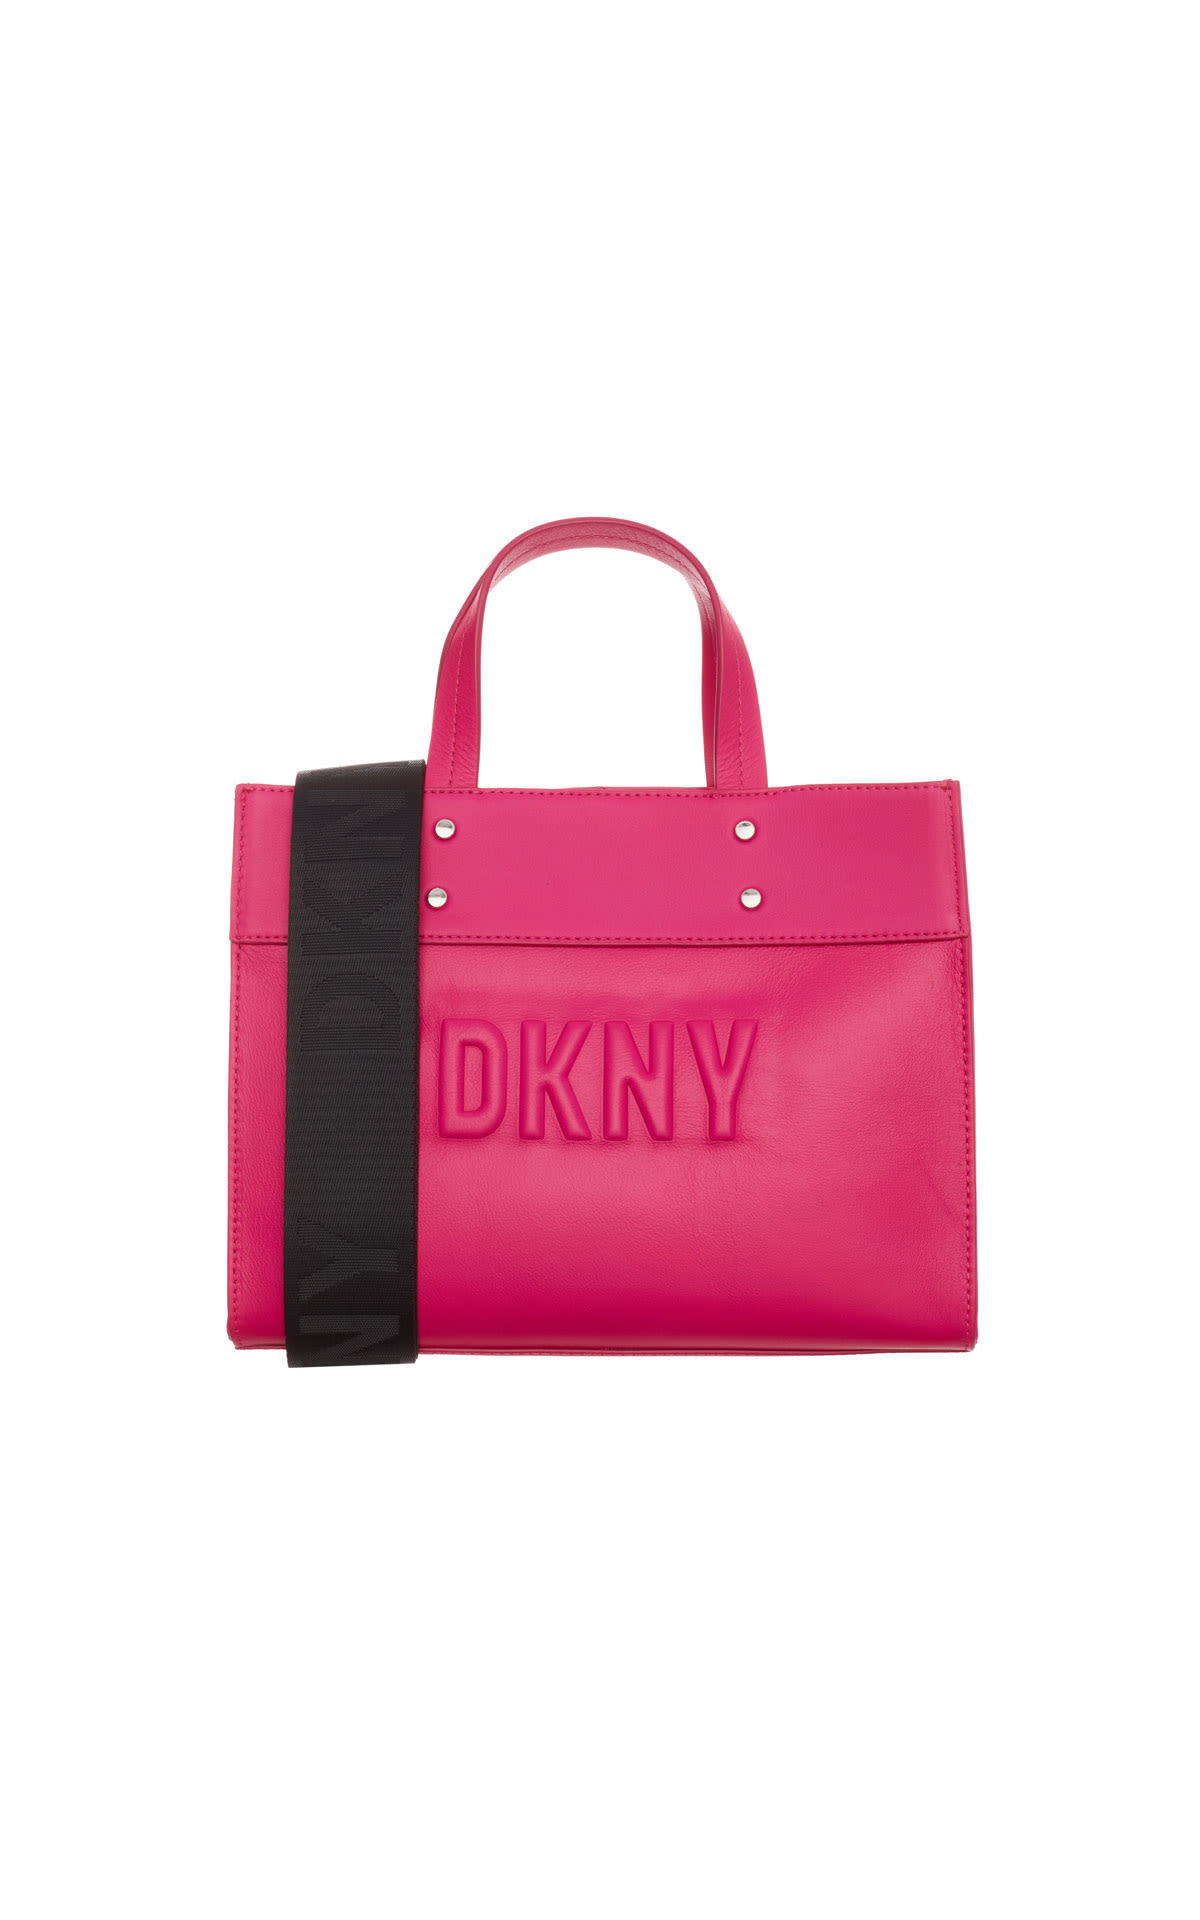 DKNY Book tote pink from Bicester Village